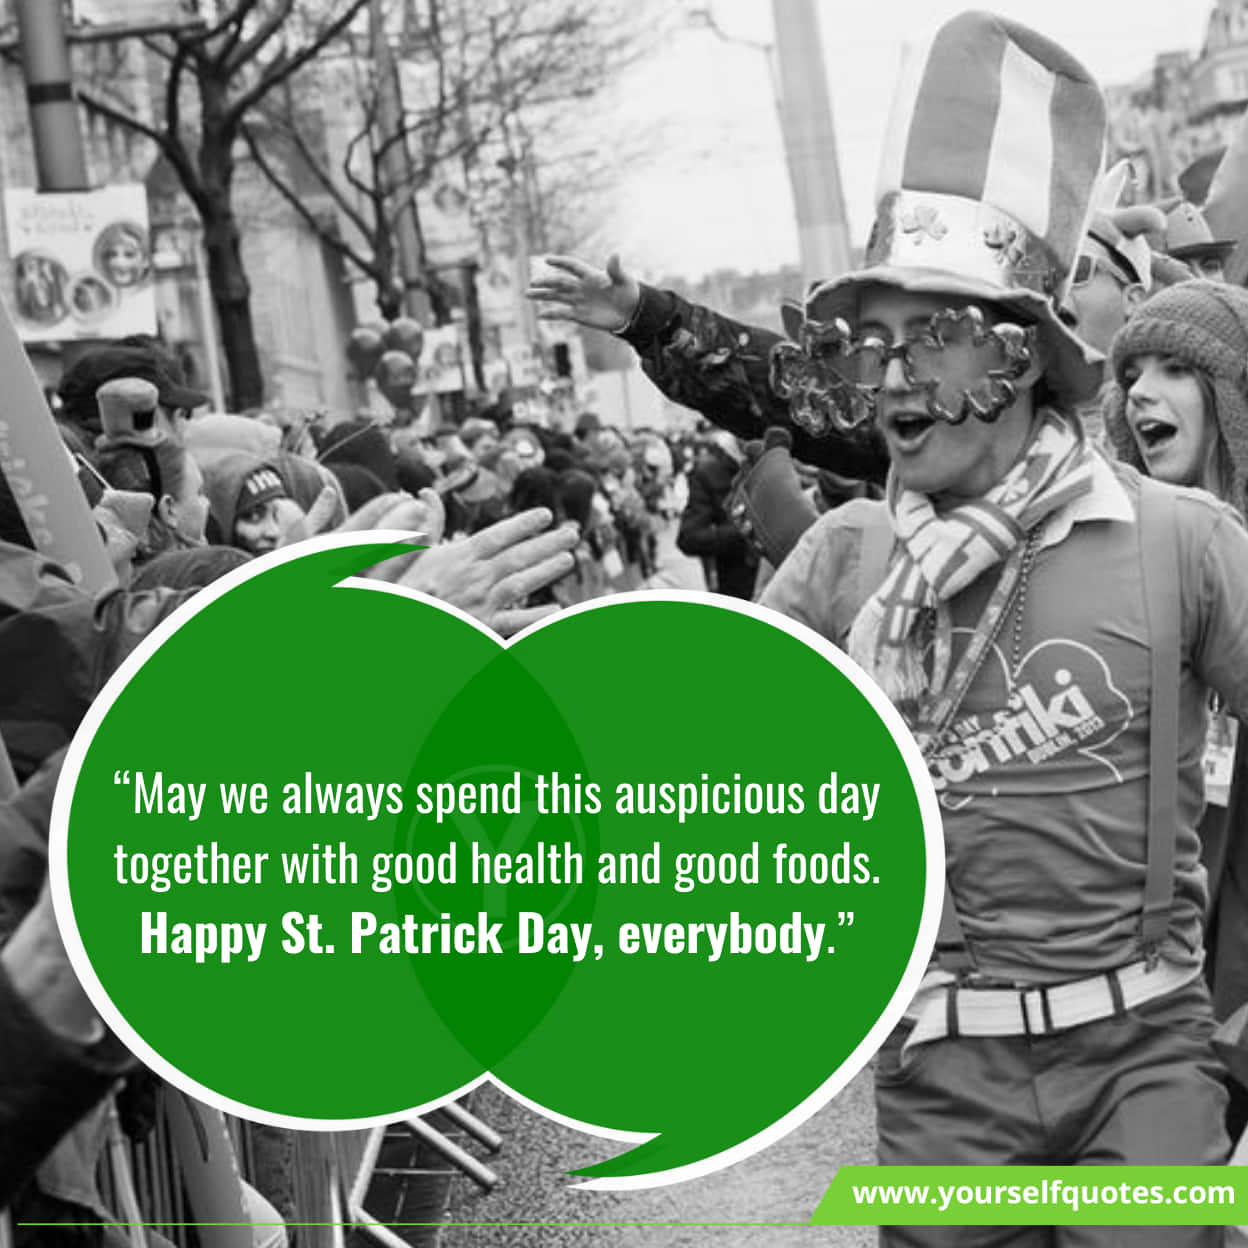 St Patrick’s Day Wishes for Friends & Family